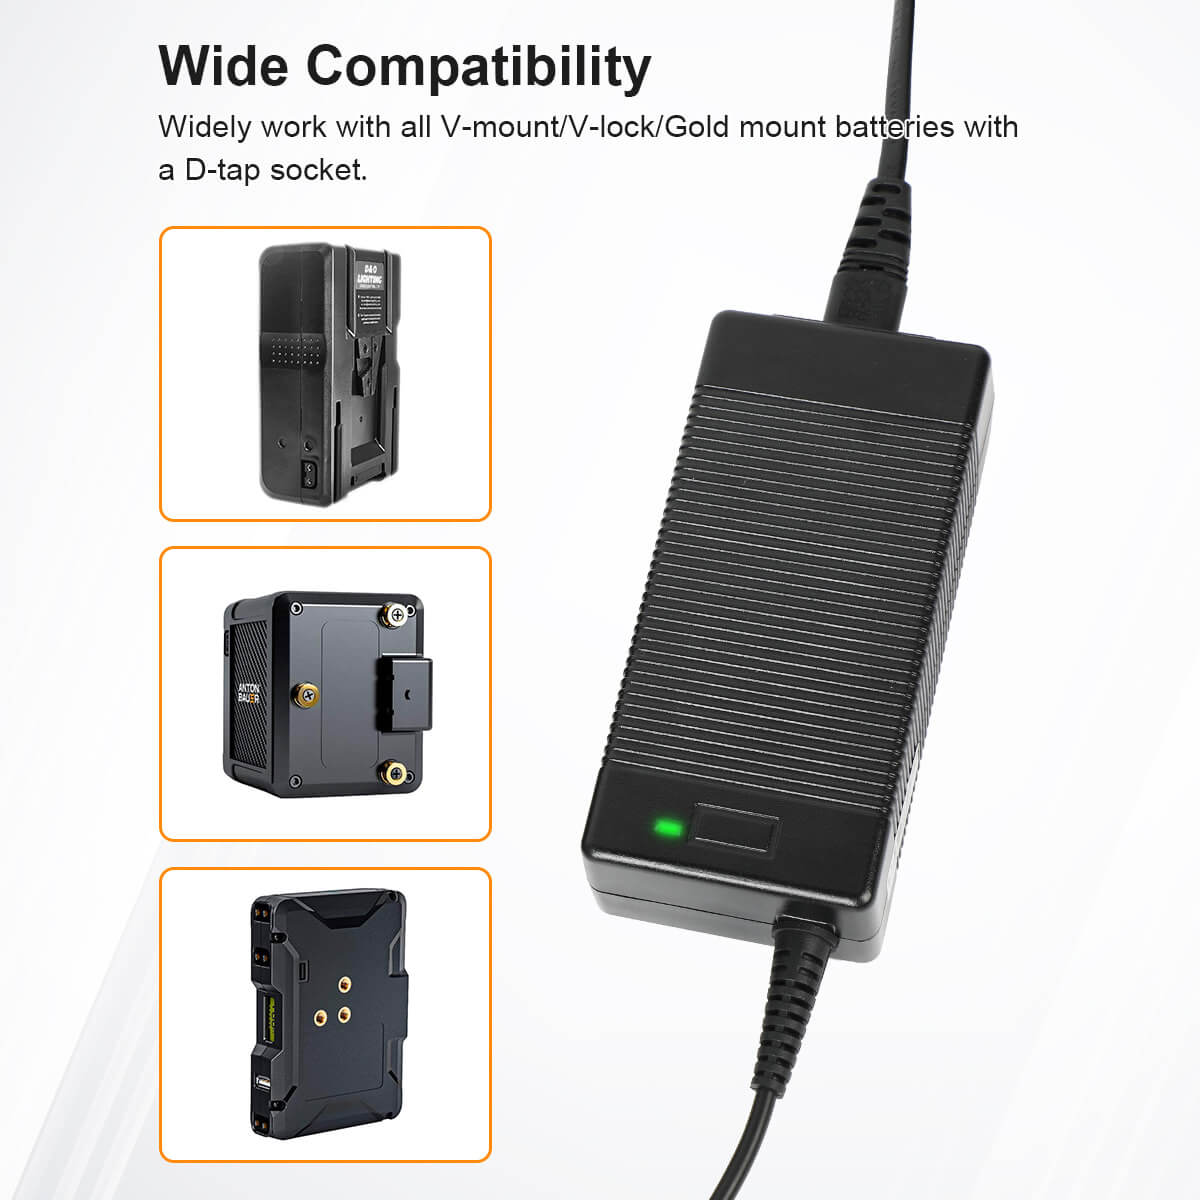 Gimpro Tap50 has universal compatibility. It can work with v-mount batteries/gold mount batteries with a d-tap socket.